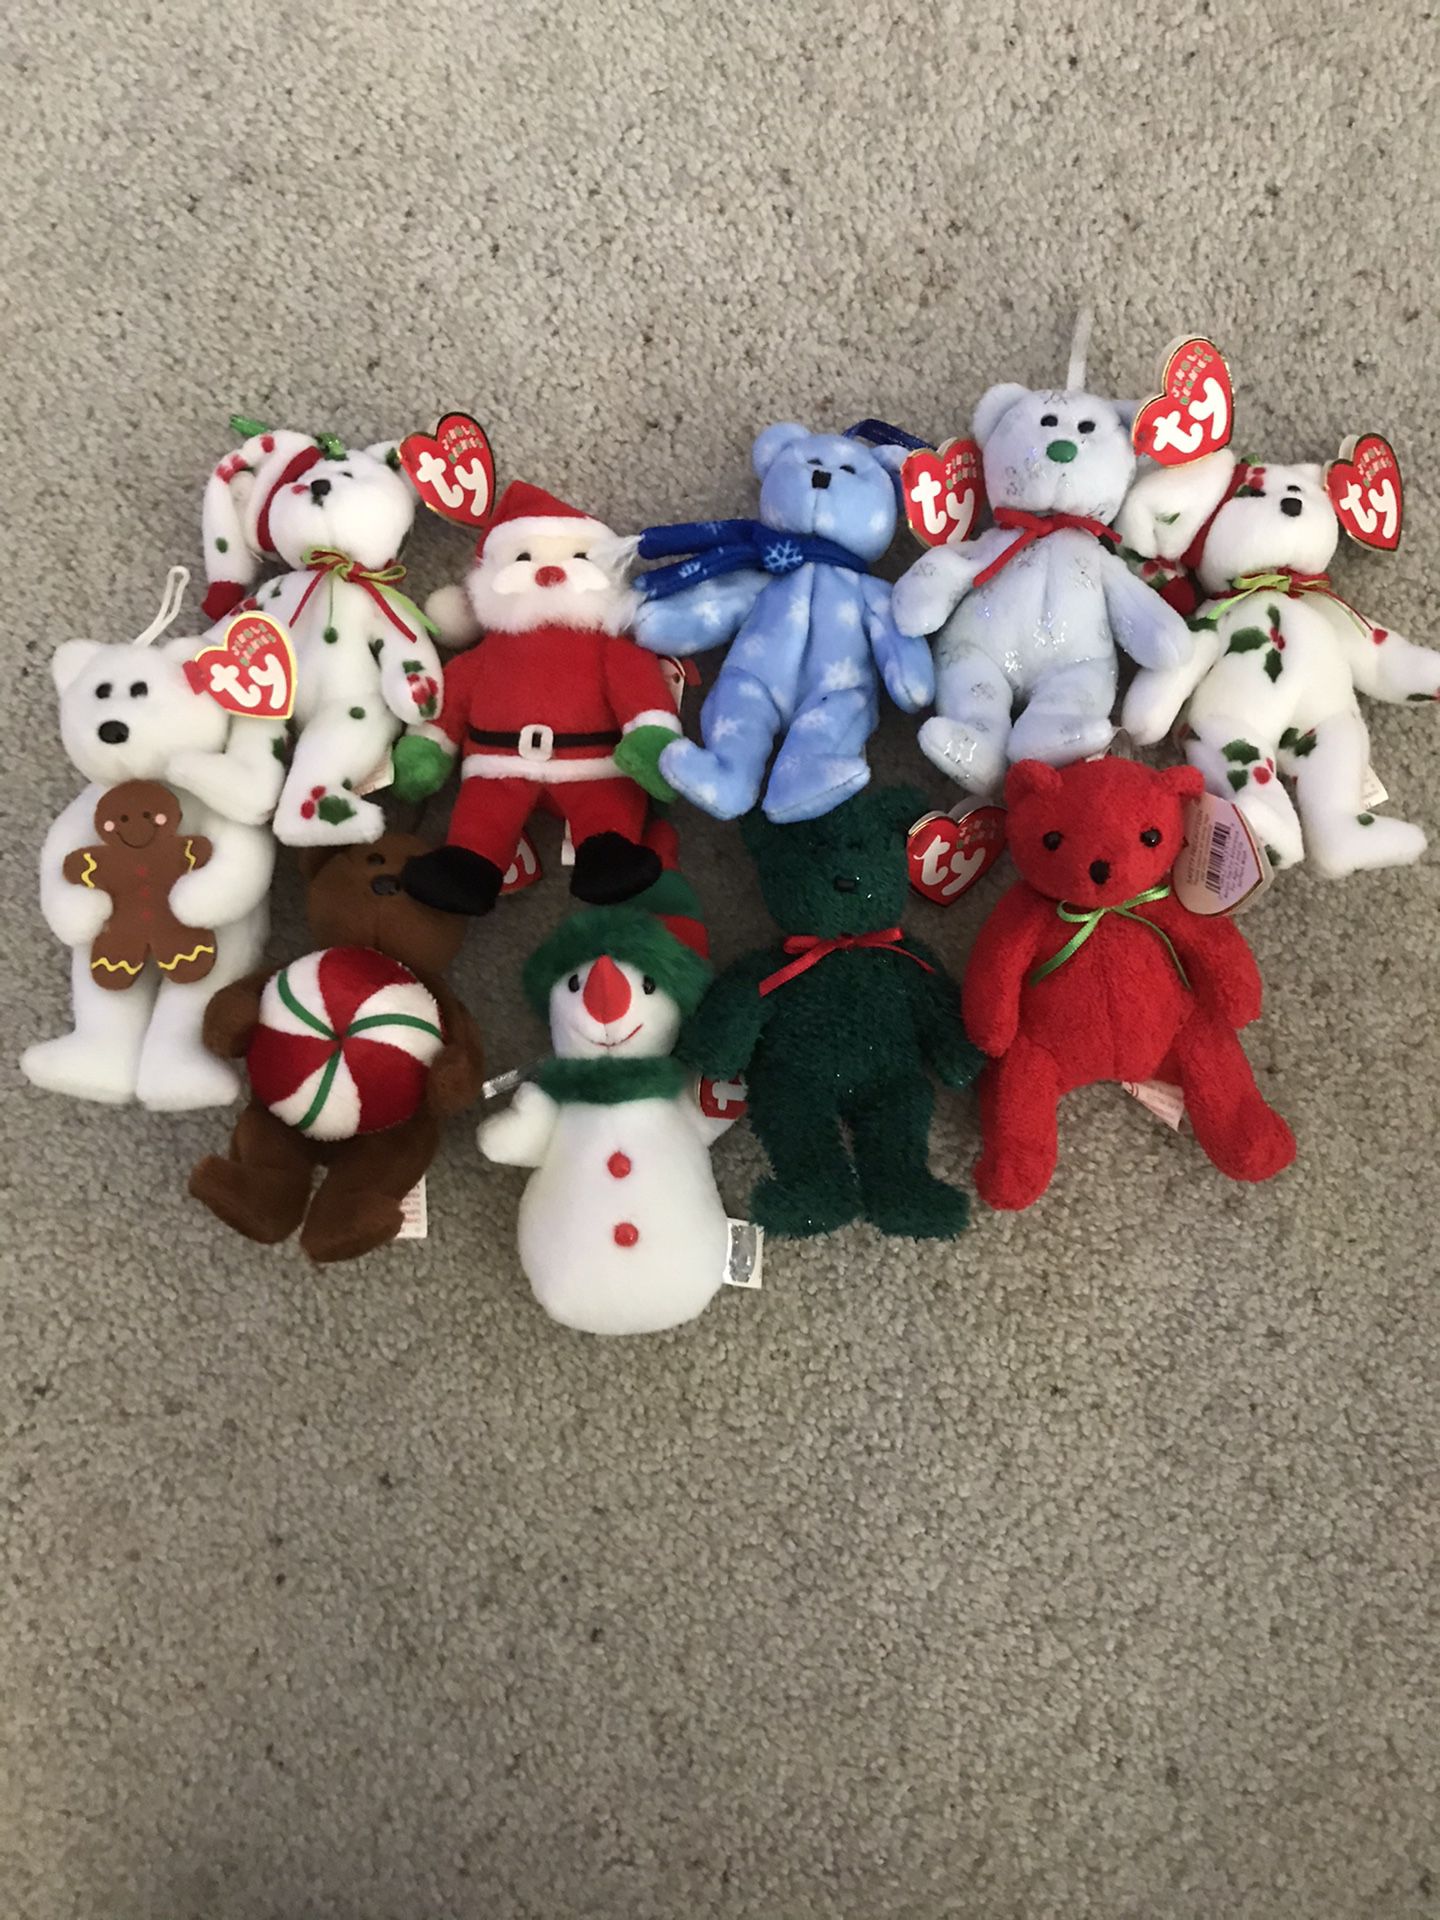 Ty teenie beanie babies holiday Christmas collection 10 small